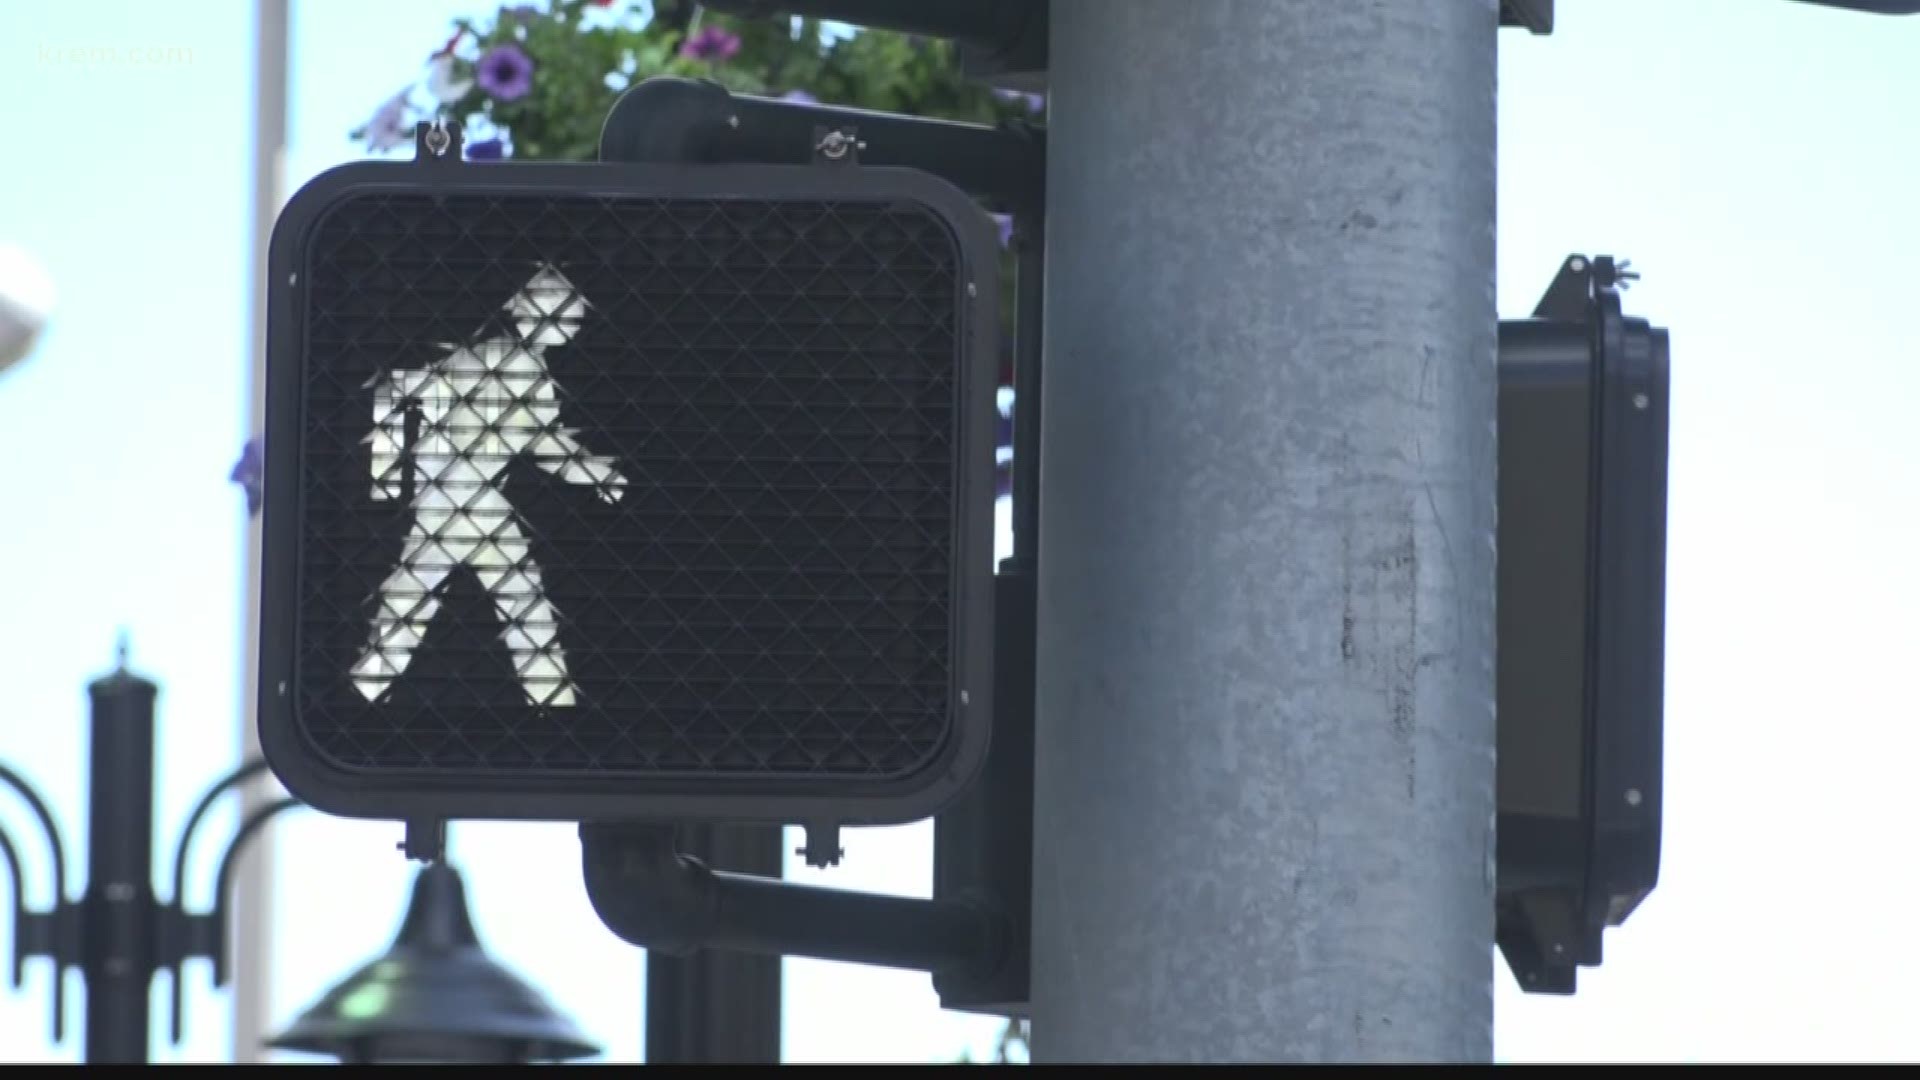 Last year, Spokane saw more than 160 pedestrians get hit by cars. Four of those people died. Spokane city leaders want to change that. Over the course of six years, all signaled cross walks will have audio cues.